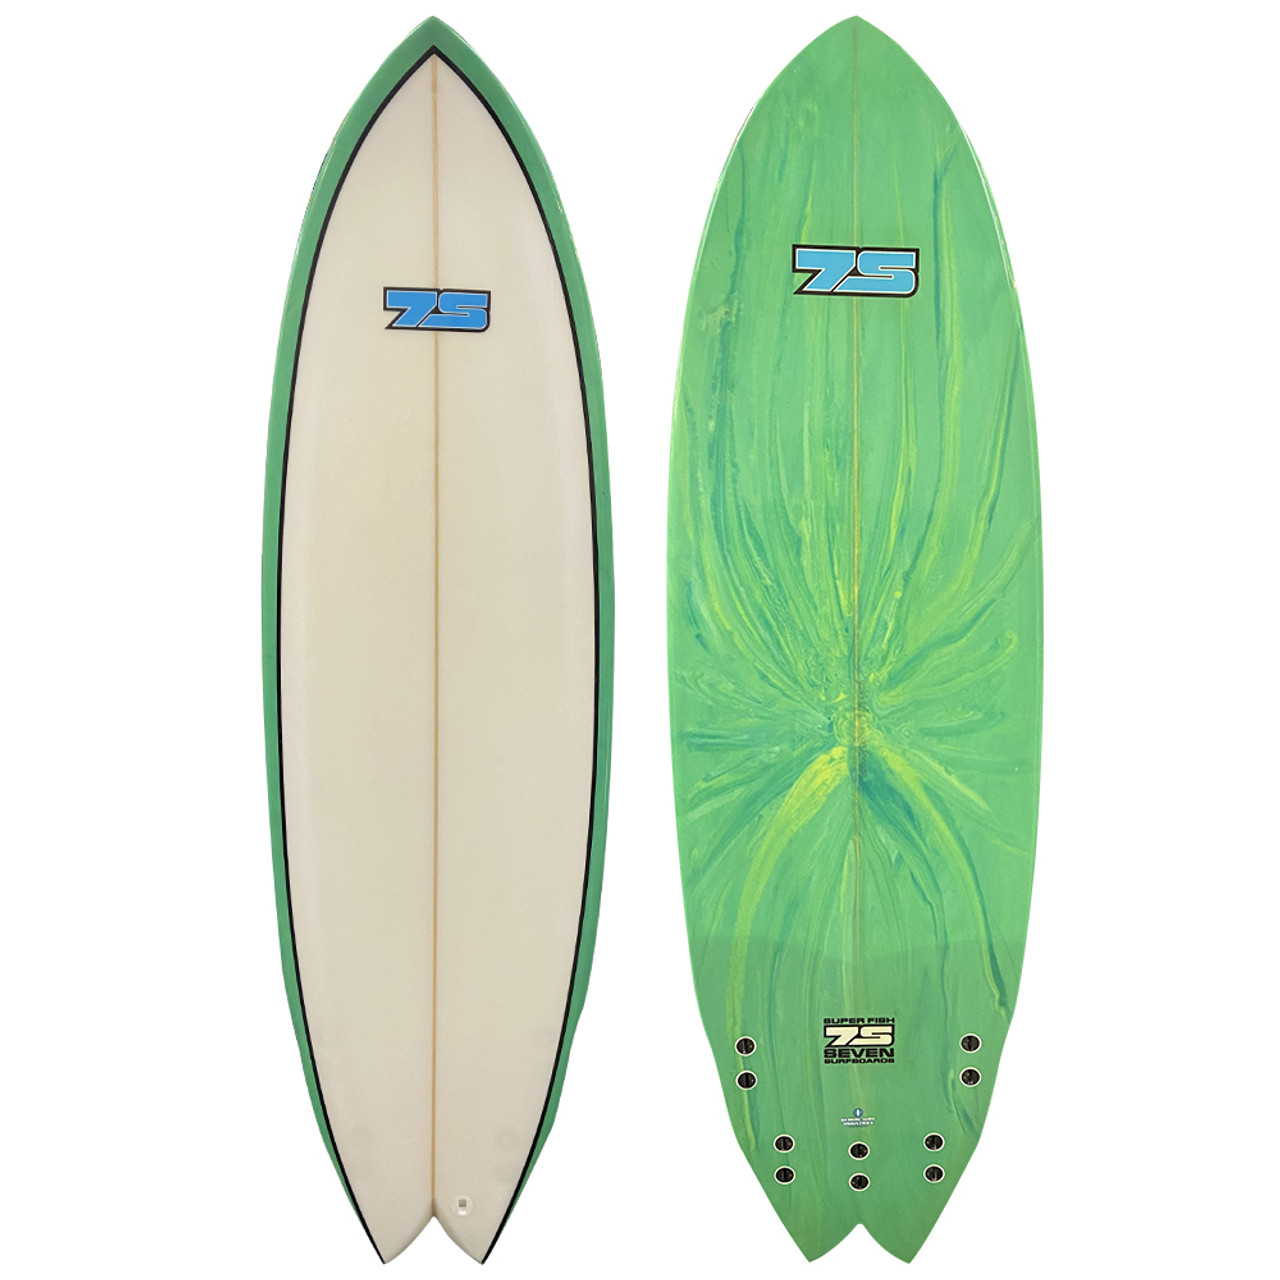 5'9 7S Surfboards Superfish Almost Like-New 5 Fin Double-Winged Swallow  Tail Surfboard